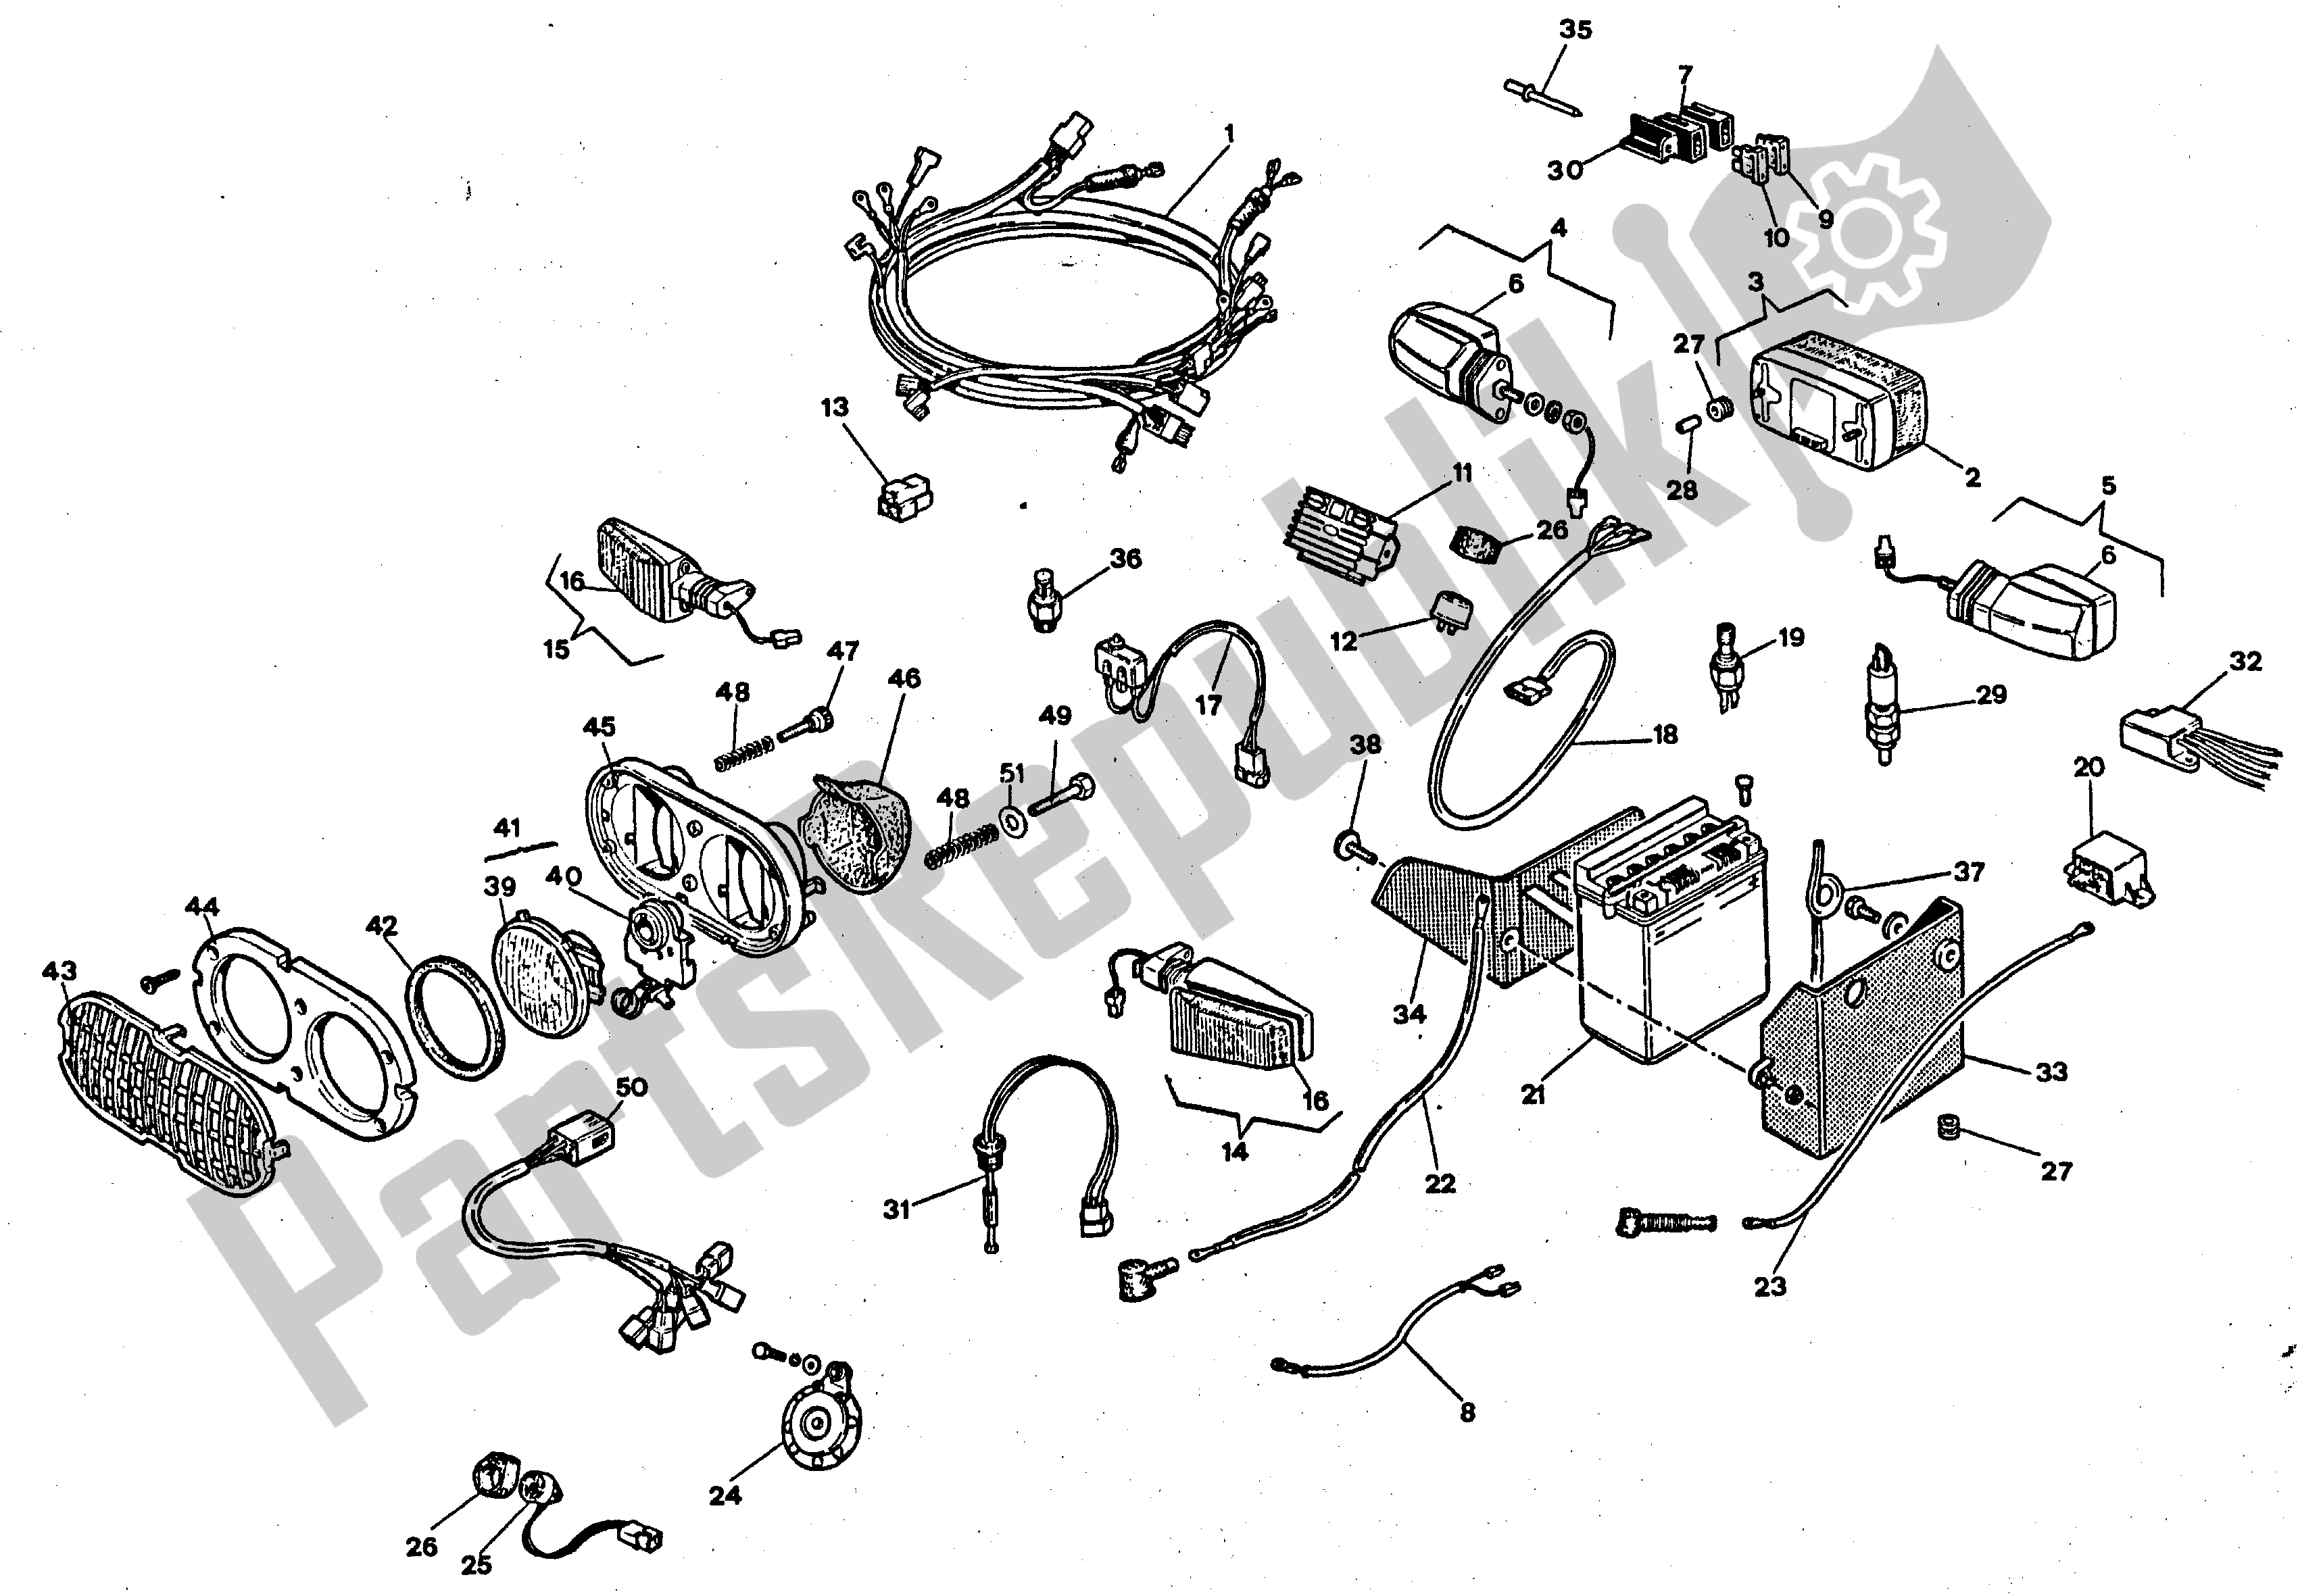 All parts for the Electrical System of the Aprilia Tuareg 350 1986 - 1988